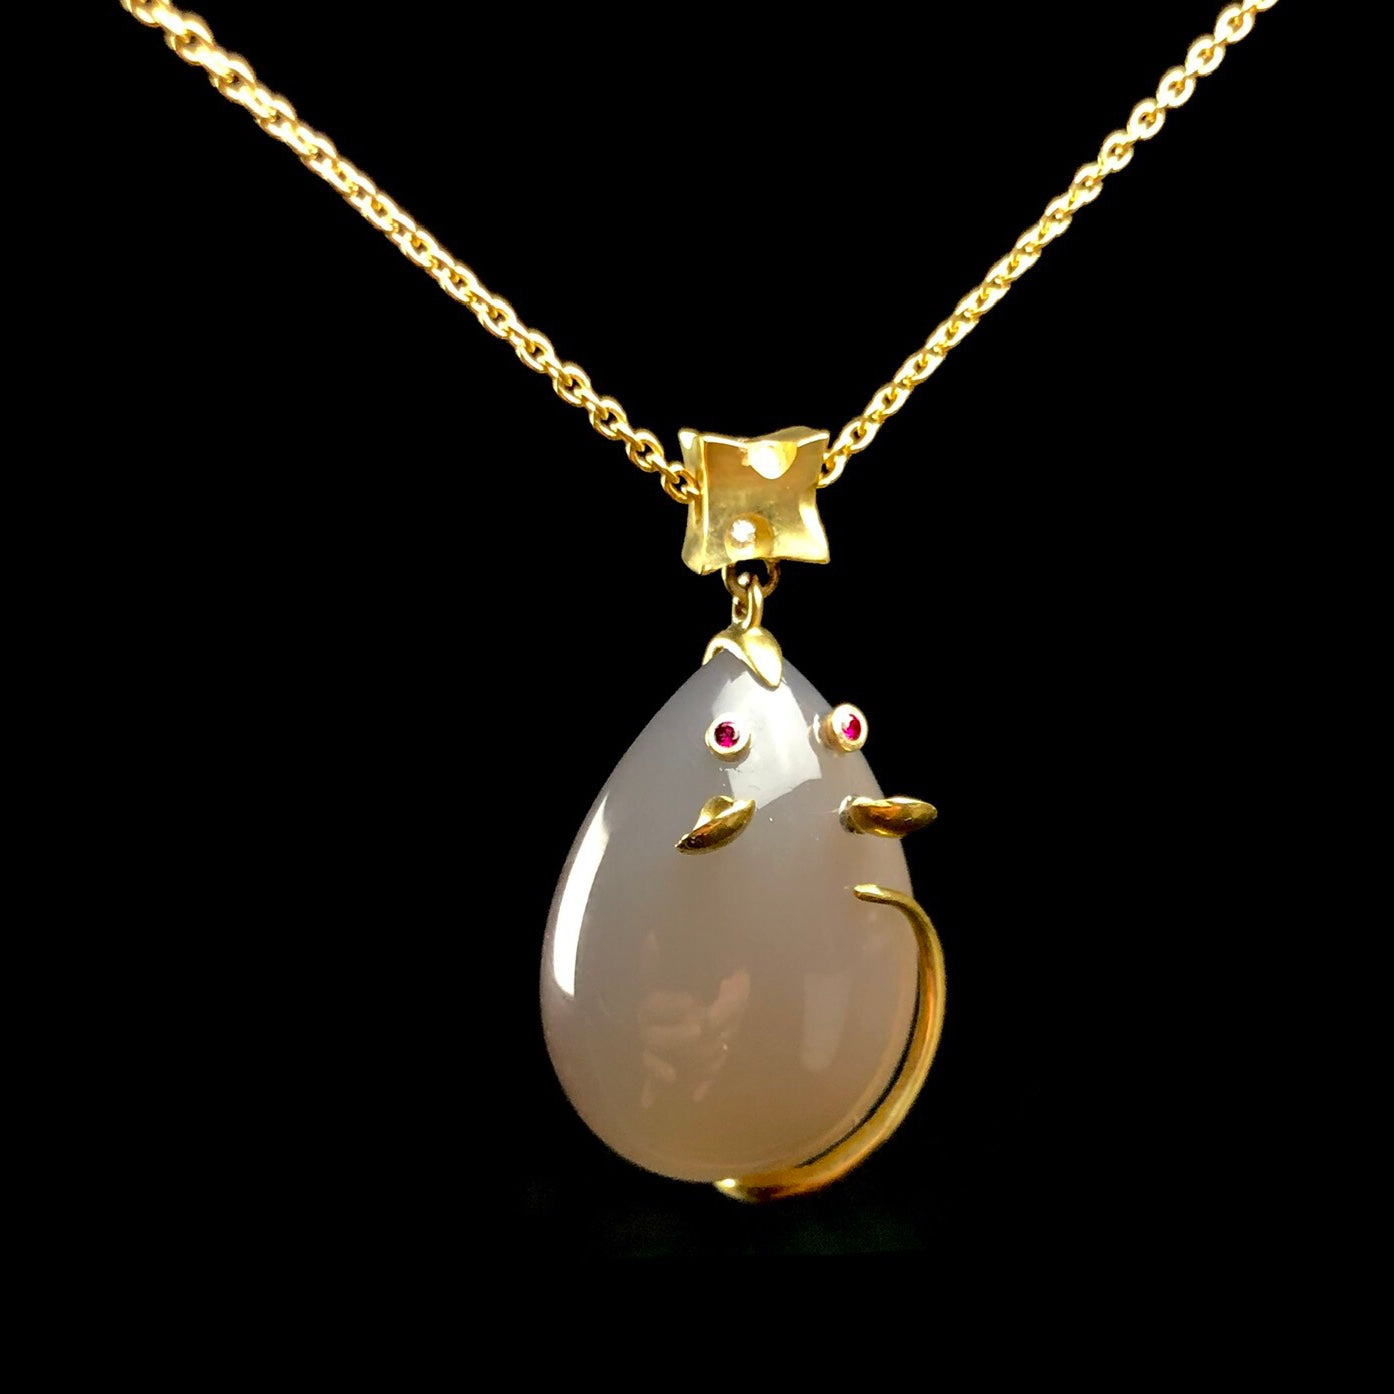 Close up view of smooth stone body of mouse pendant on gold chian